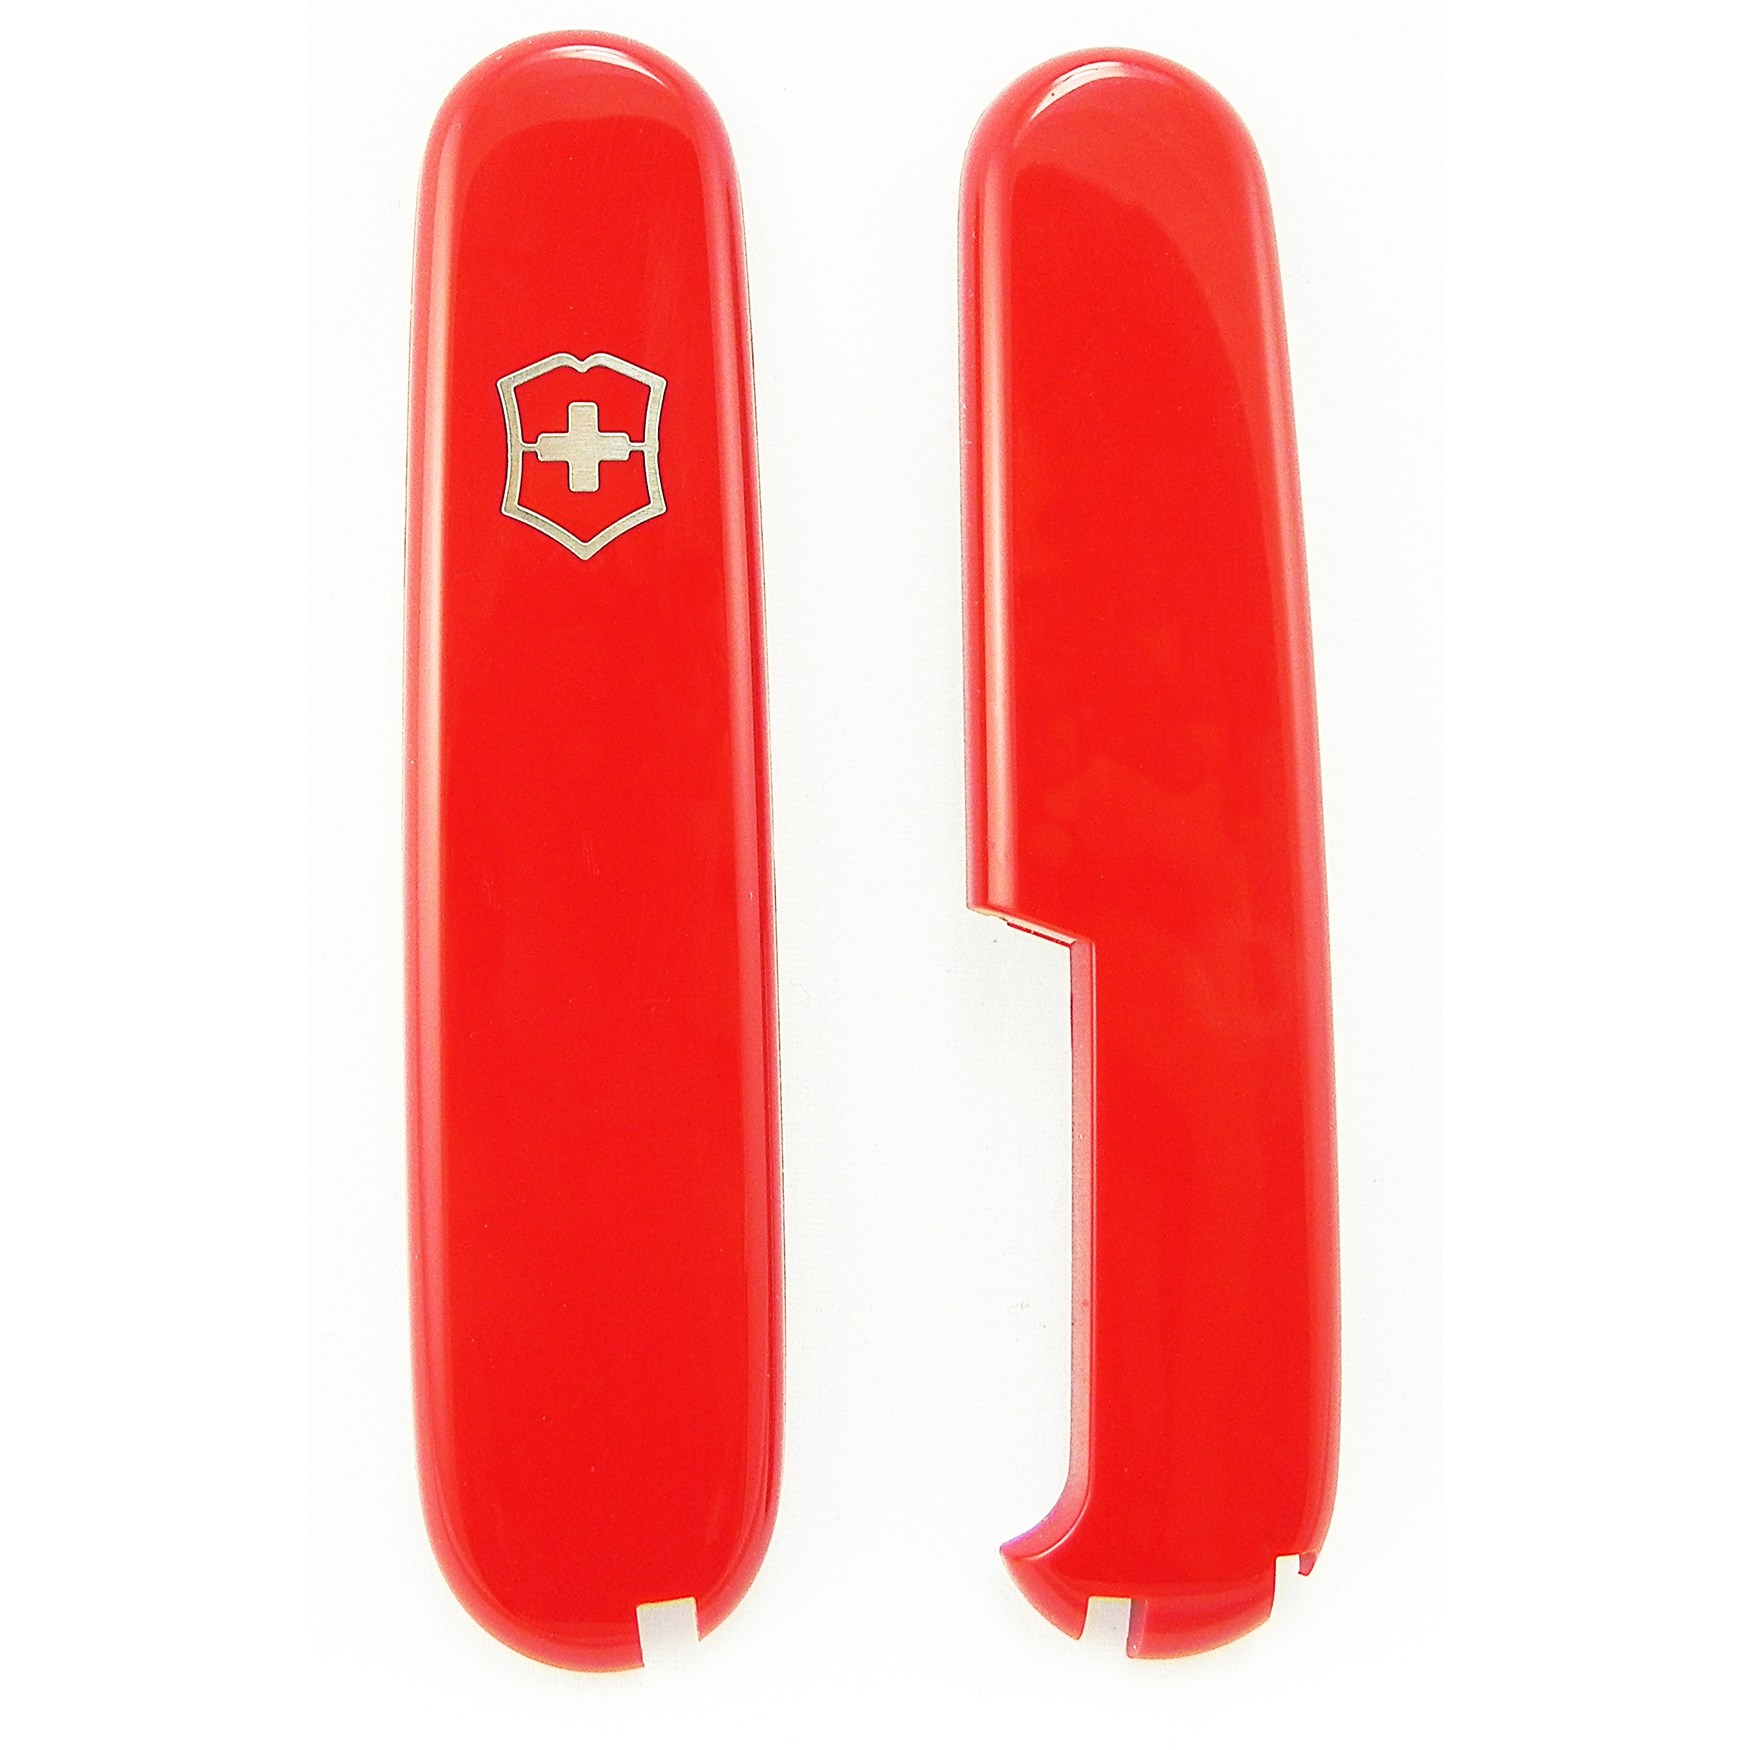 Victorinox Plus Scales - Red with Pen Slot for 91mm Swiss Army Knife handles - official Victorinox stockist